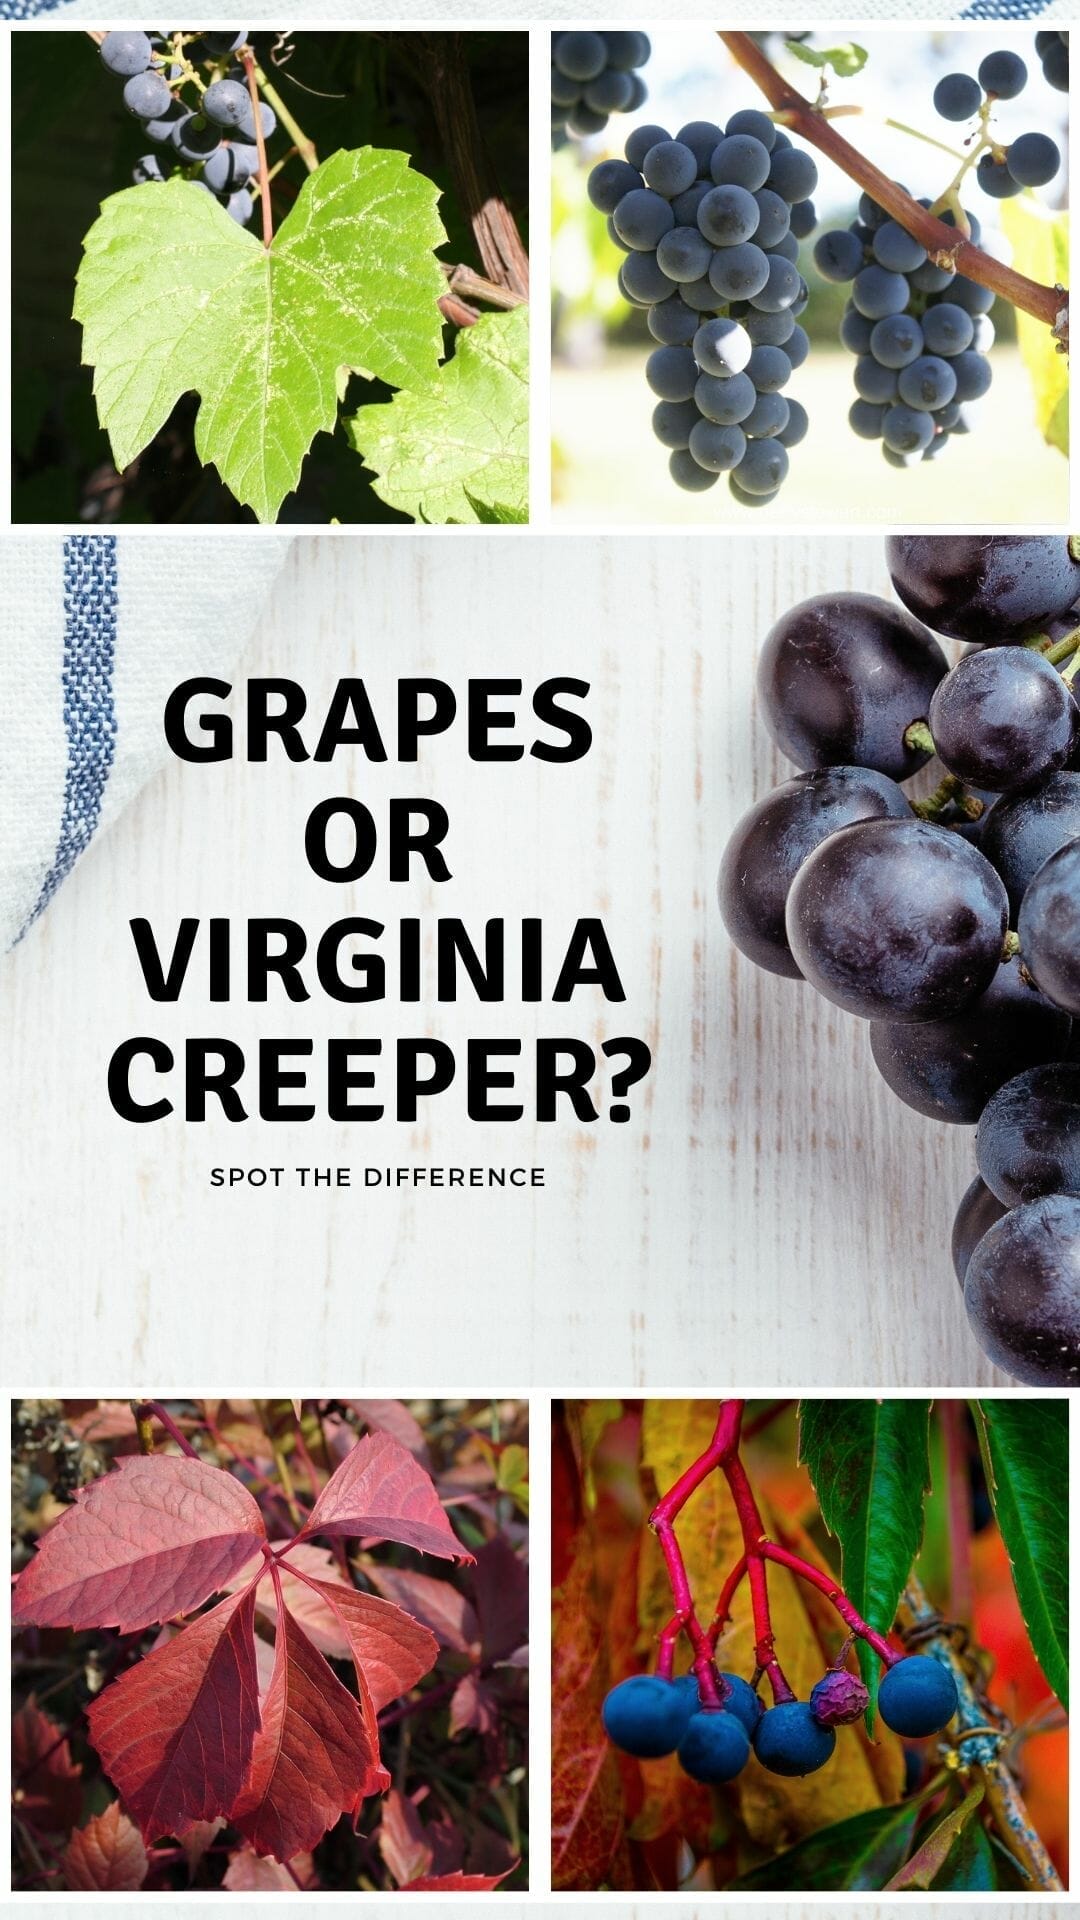 Growing Virginia Creeper Vine - Caring For And Pruning Virginia Creepers